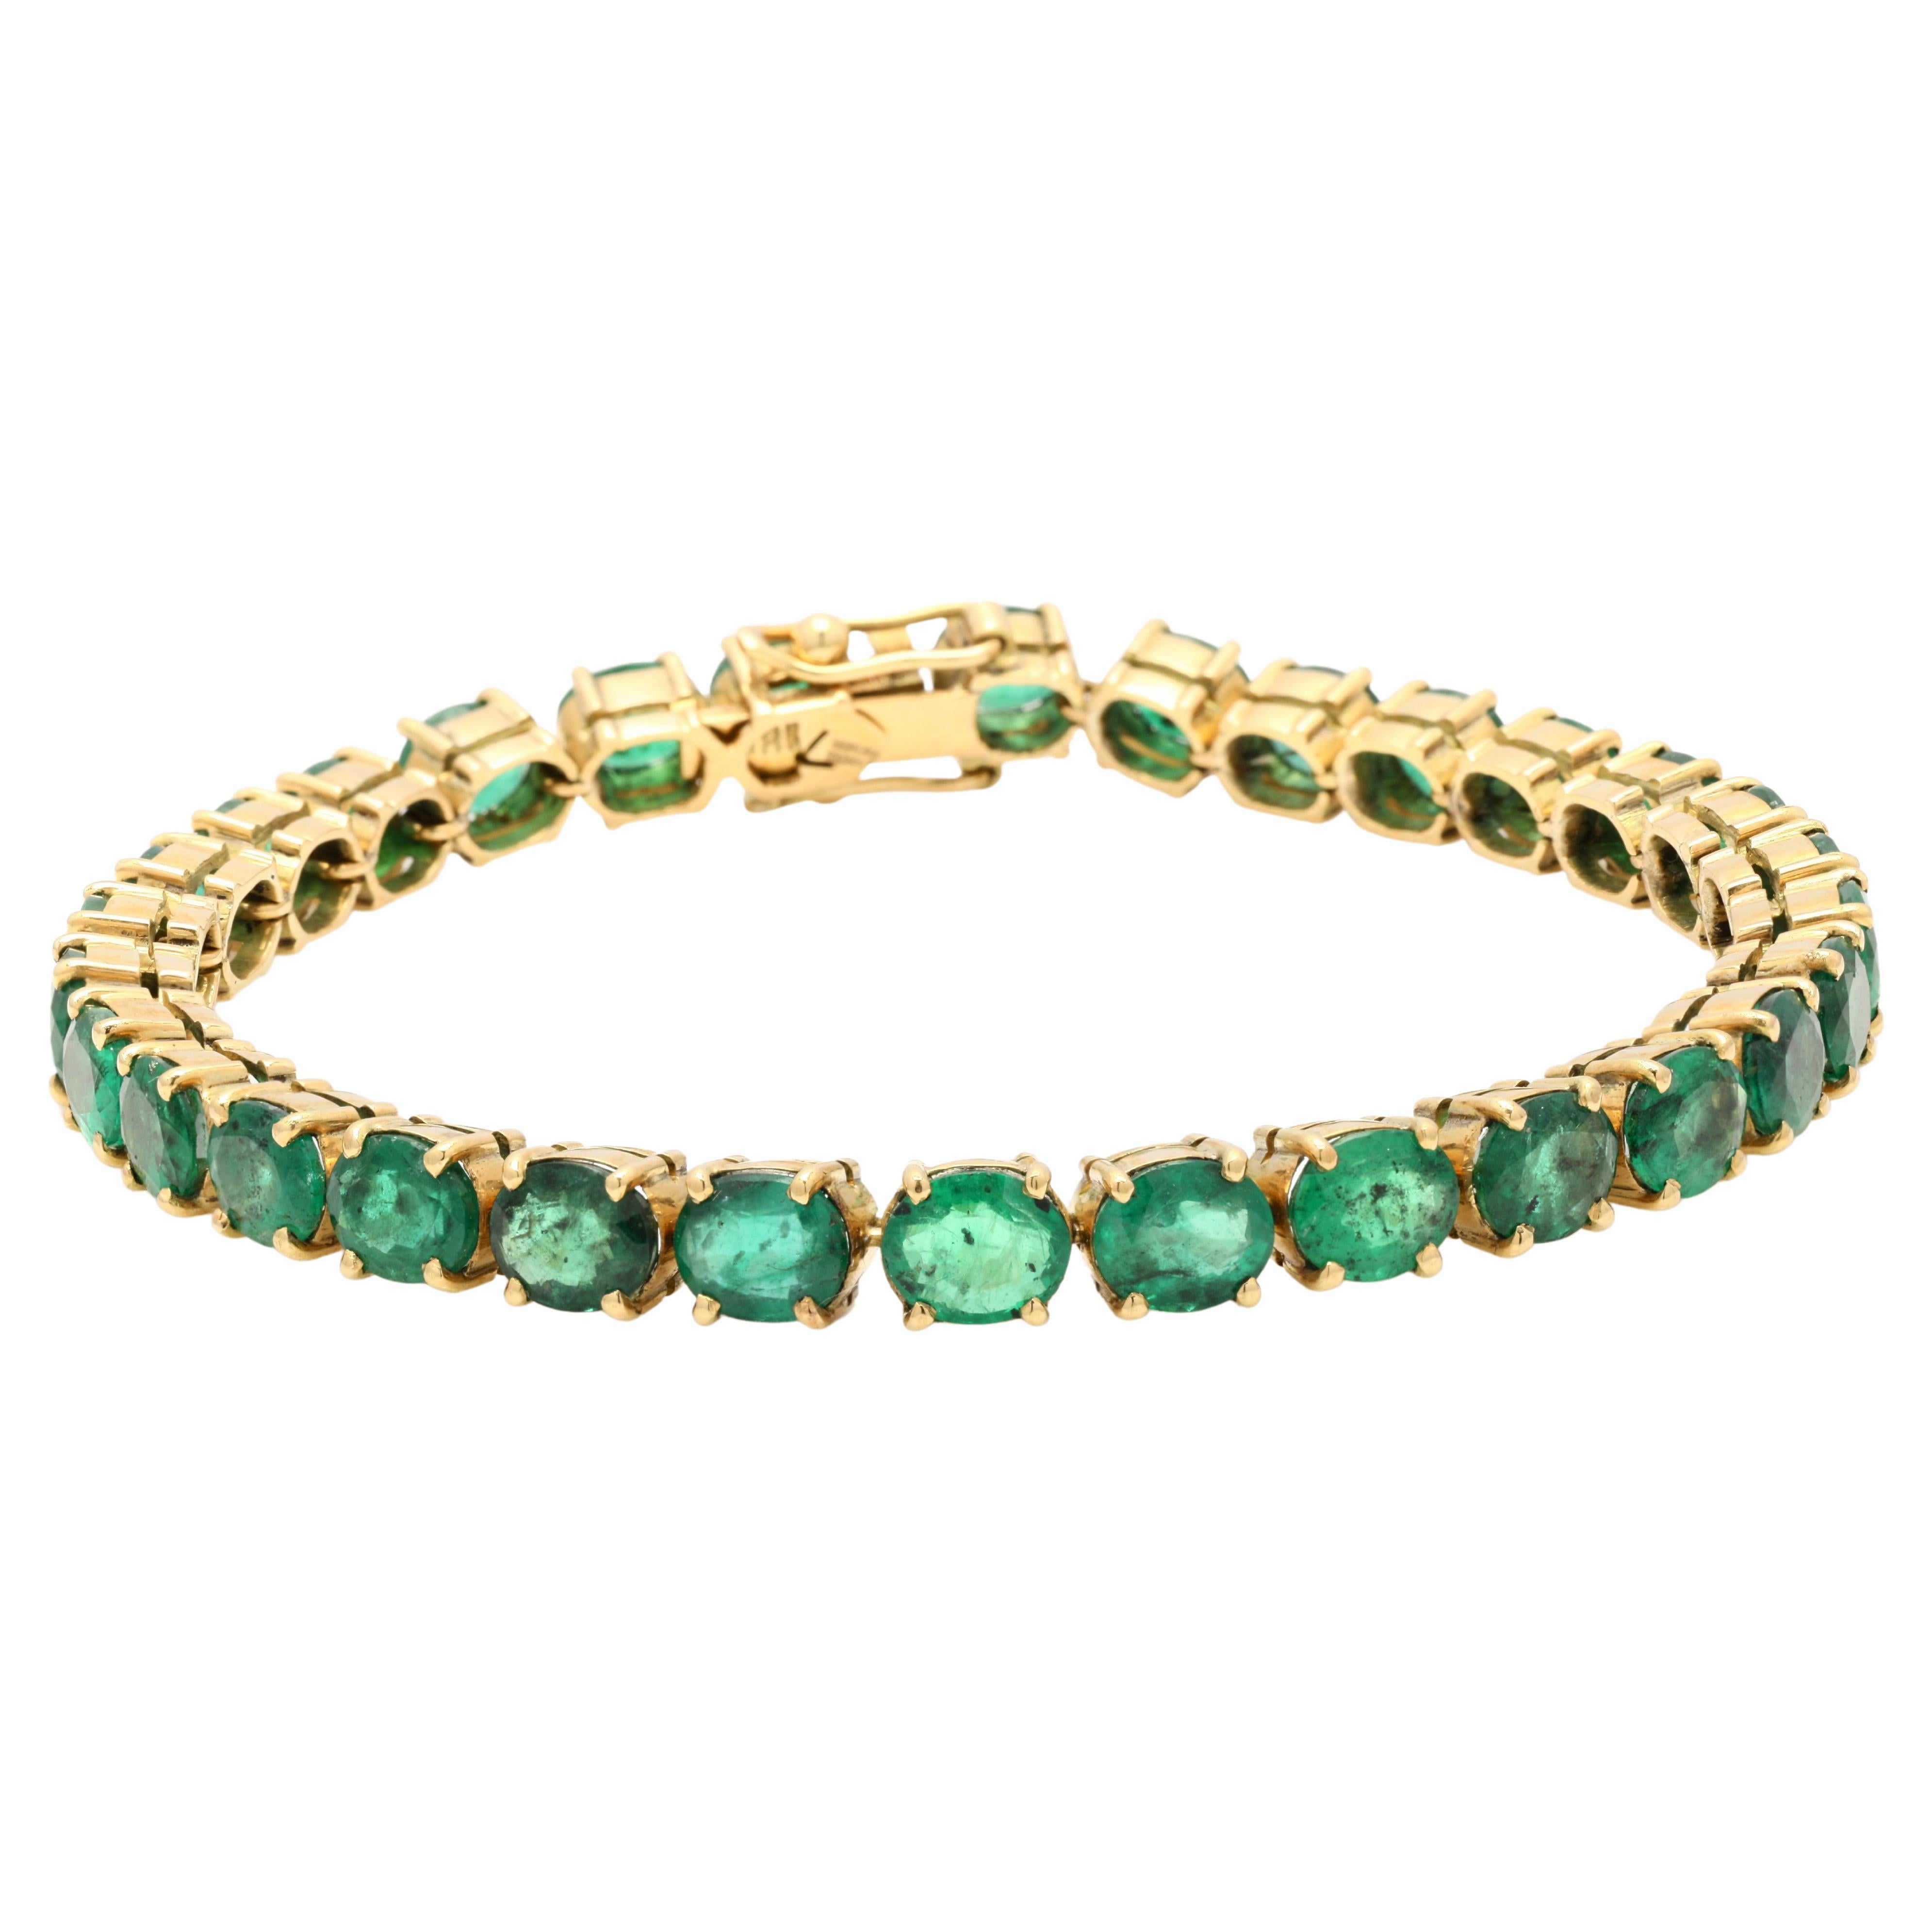 24.5ct Oval Green Emerald Gemstone Bracelet Inlaid in 14K Yellow Gold Settings For Sale